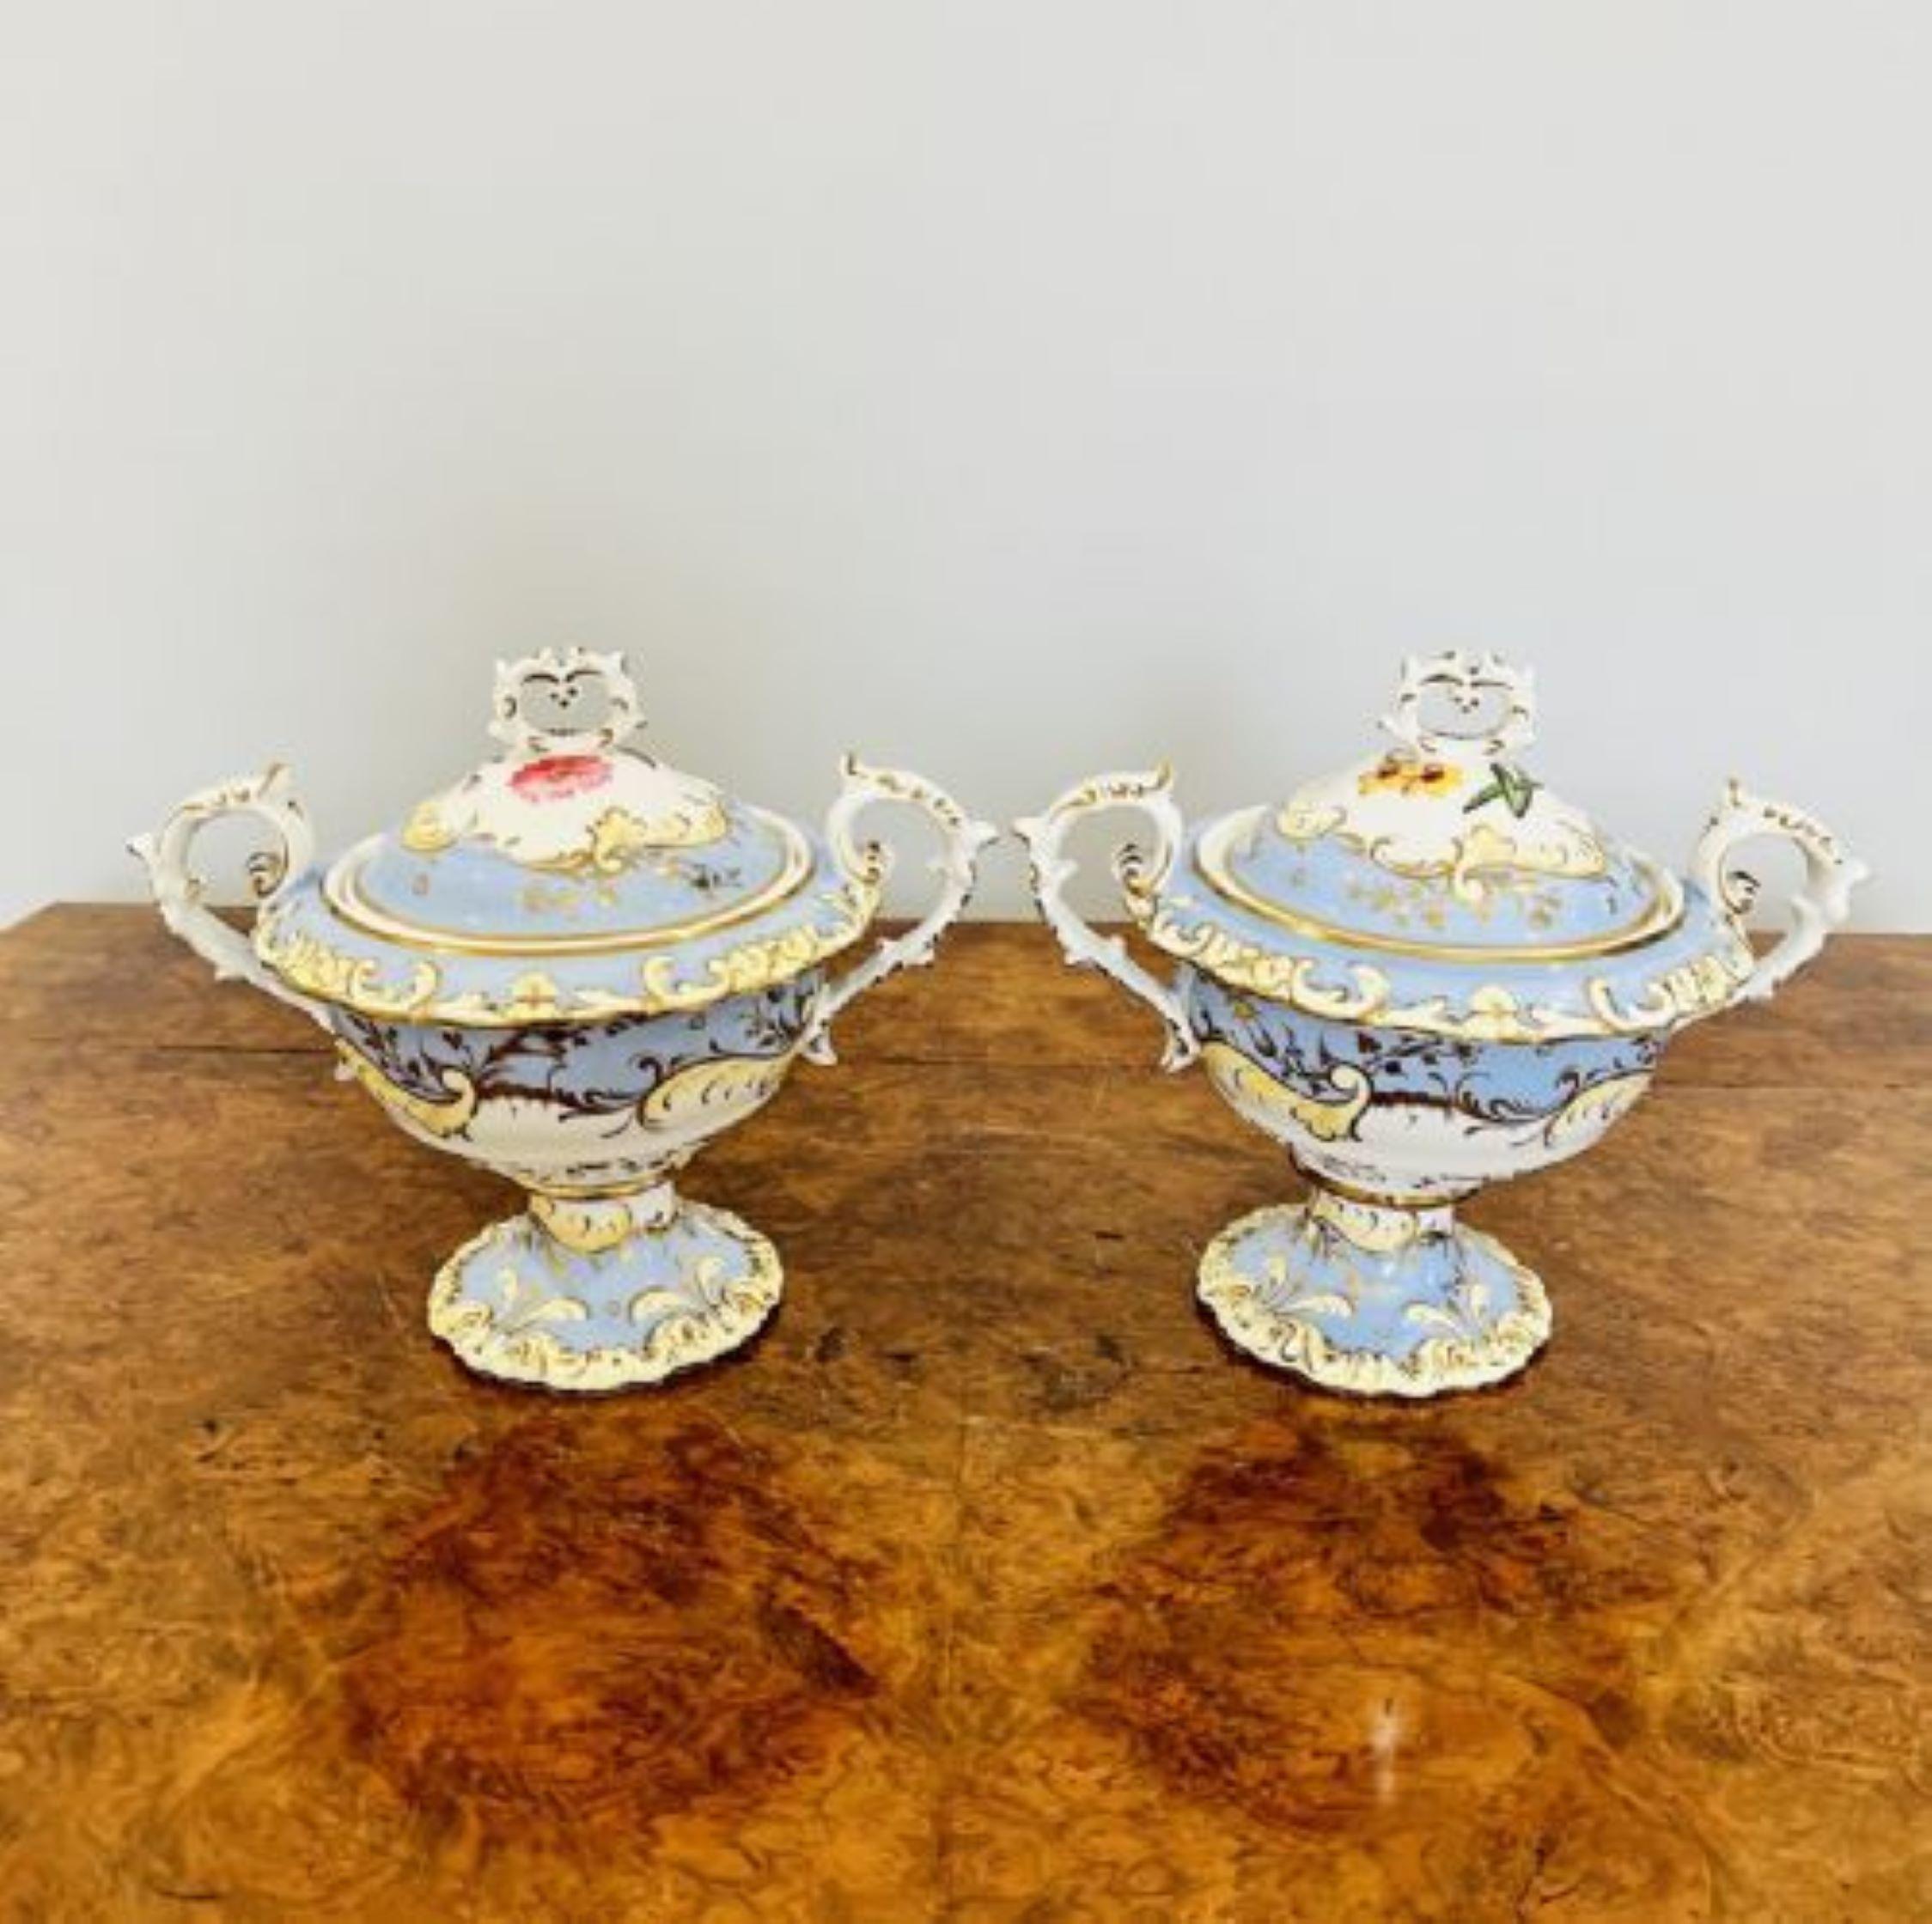 Quality Pair of Chamberlains Worcester sauce tureens and covers having scroll moulded pierced finials above foliate decorated domed lids with blue, white and gilt bodies and gilt acanthus leaf moulded handles raised on flared feet. 